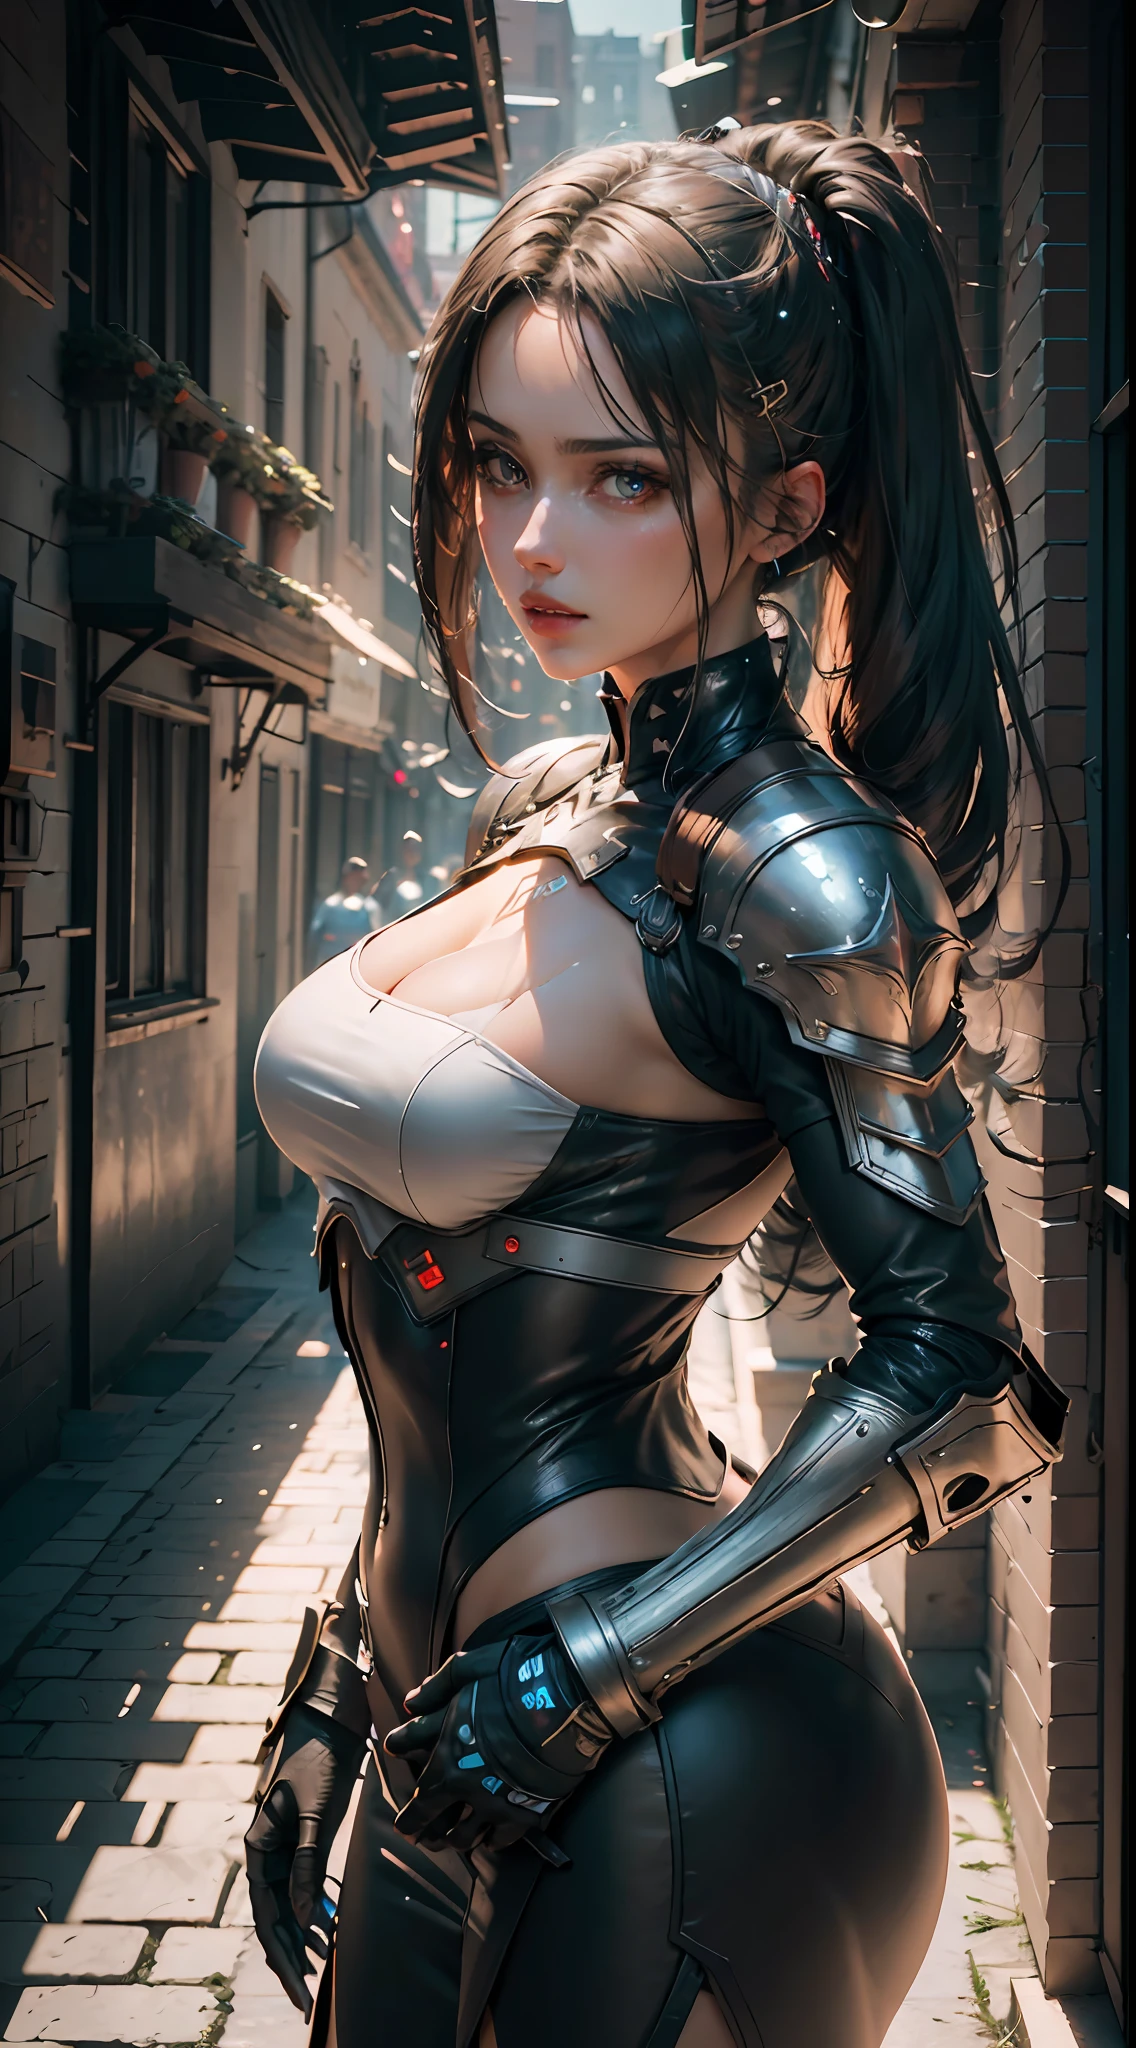 ((Best Quality)), ((Masterpiece)), (Detailed: 1.4), 3D, An Image of a Beautiful Cyberpunk Woman,HDR (High Dynamic Range),Ray Tracing,NVIDIA RTX,Super-Resolution,Unreal 5,Subsurface Scattering, PBR Texture, Post-processing, Anisotropic Filtering, Depth of Field, Maximum Clarity and Sharpness, Multilayer Textures, Albedo and Specular Maps, Surface Shading, Accurate Simulation of Light-Material Interaction, Perfect Proportions, Octane Render,  Two-Tone Lighting,Wide Aperture,Low ISO,White Balance,Rule of Thirds,8K RAW, Medieval Armor